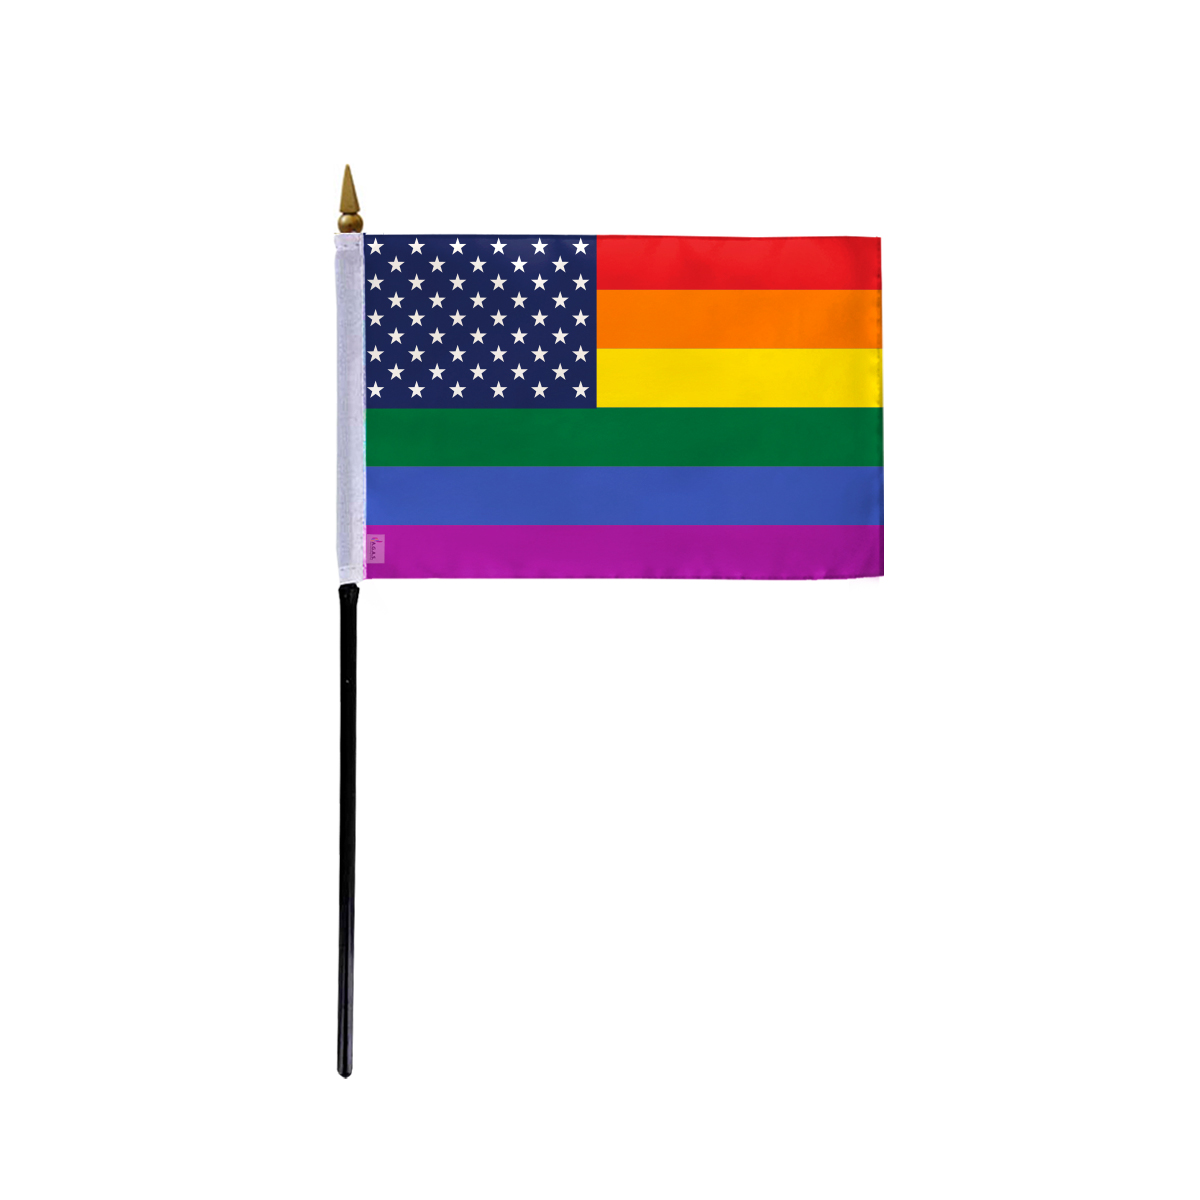 AGAS Small New Old Glory Pride Flag 4x6 inch